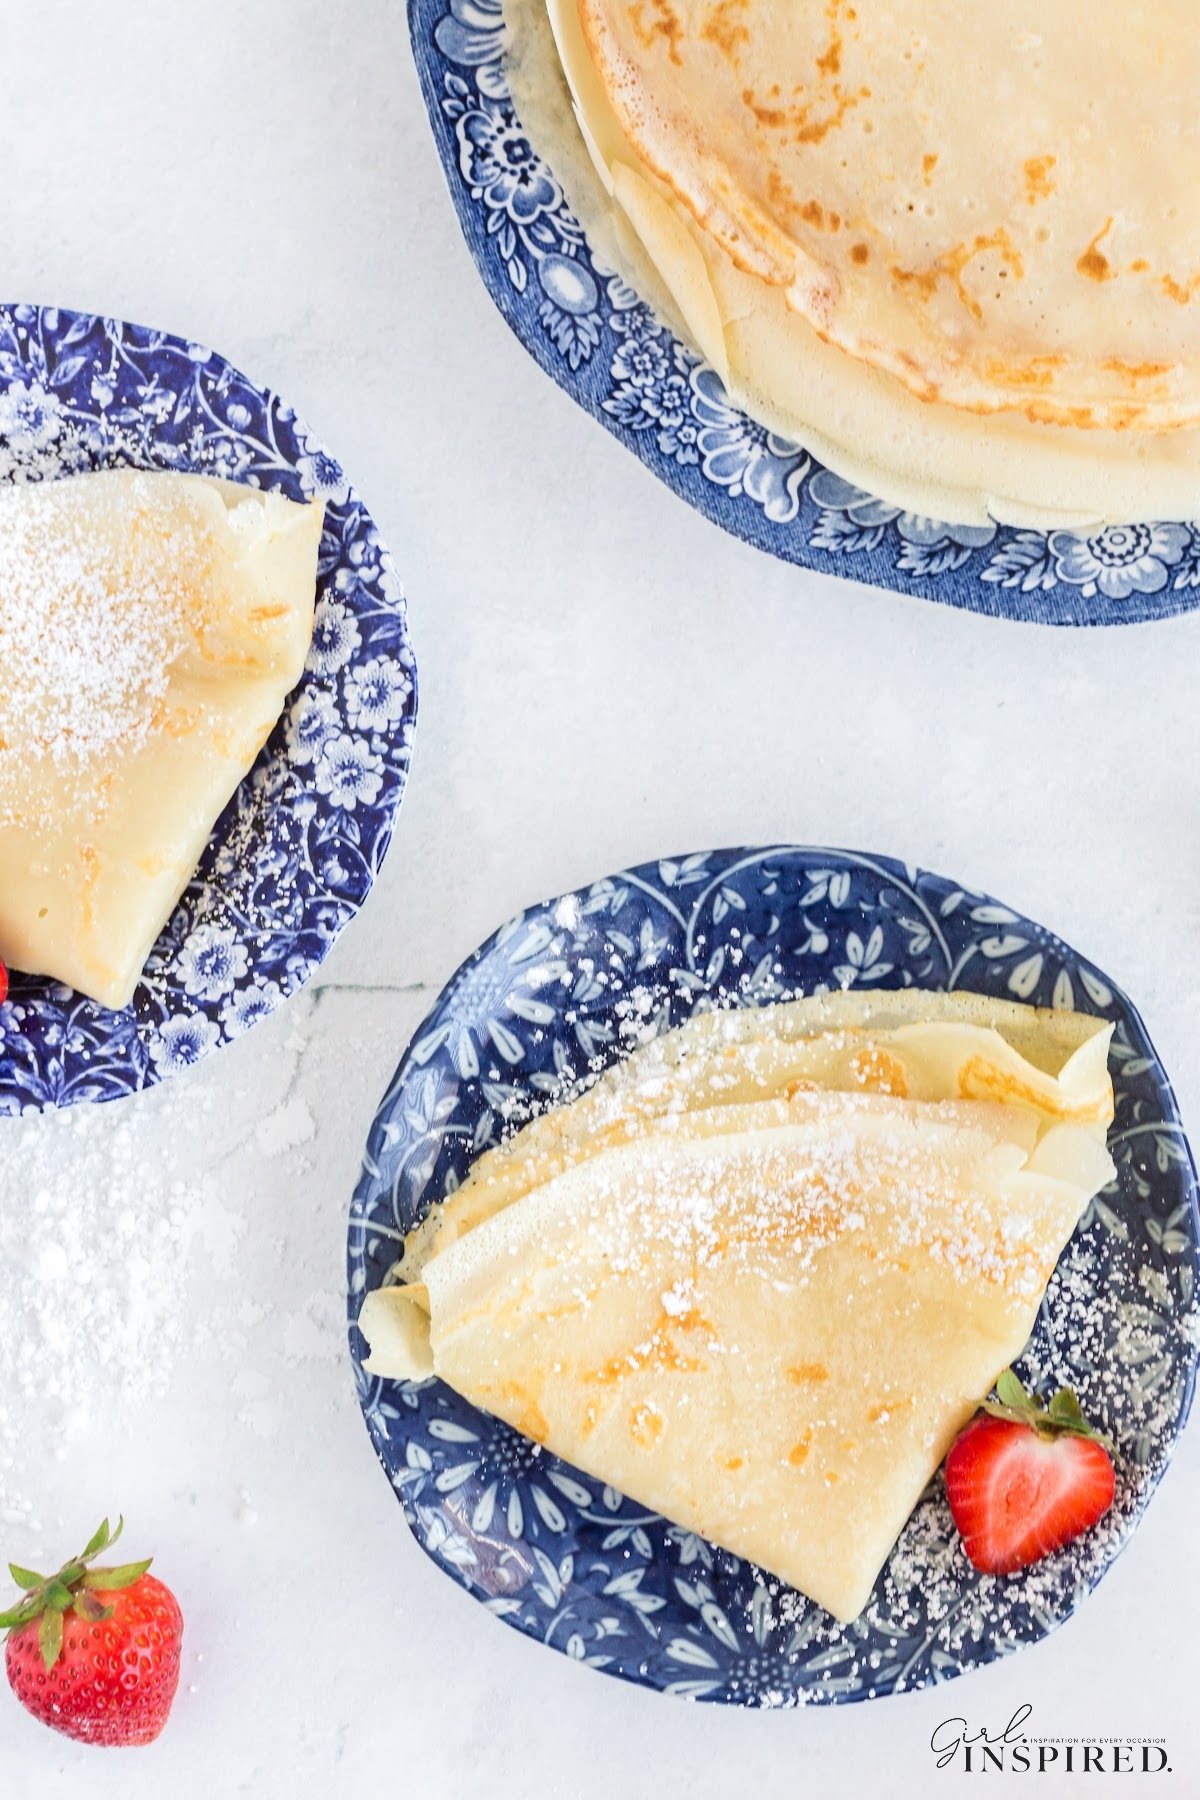 Folded breakfast crepes on plates dusted with powdered sugar.